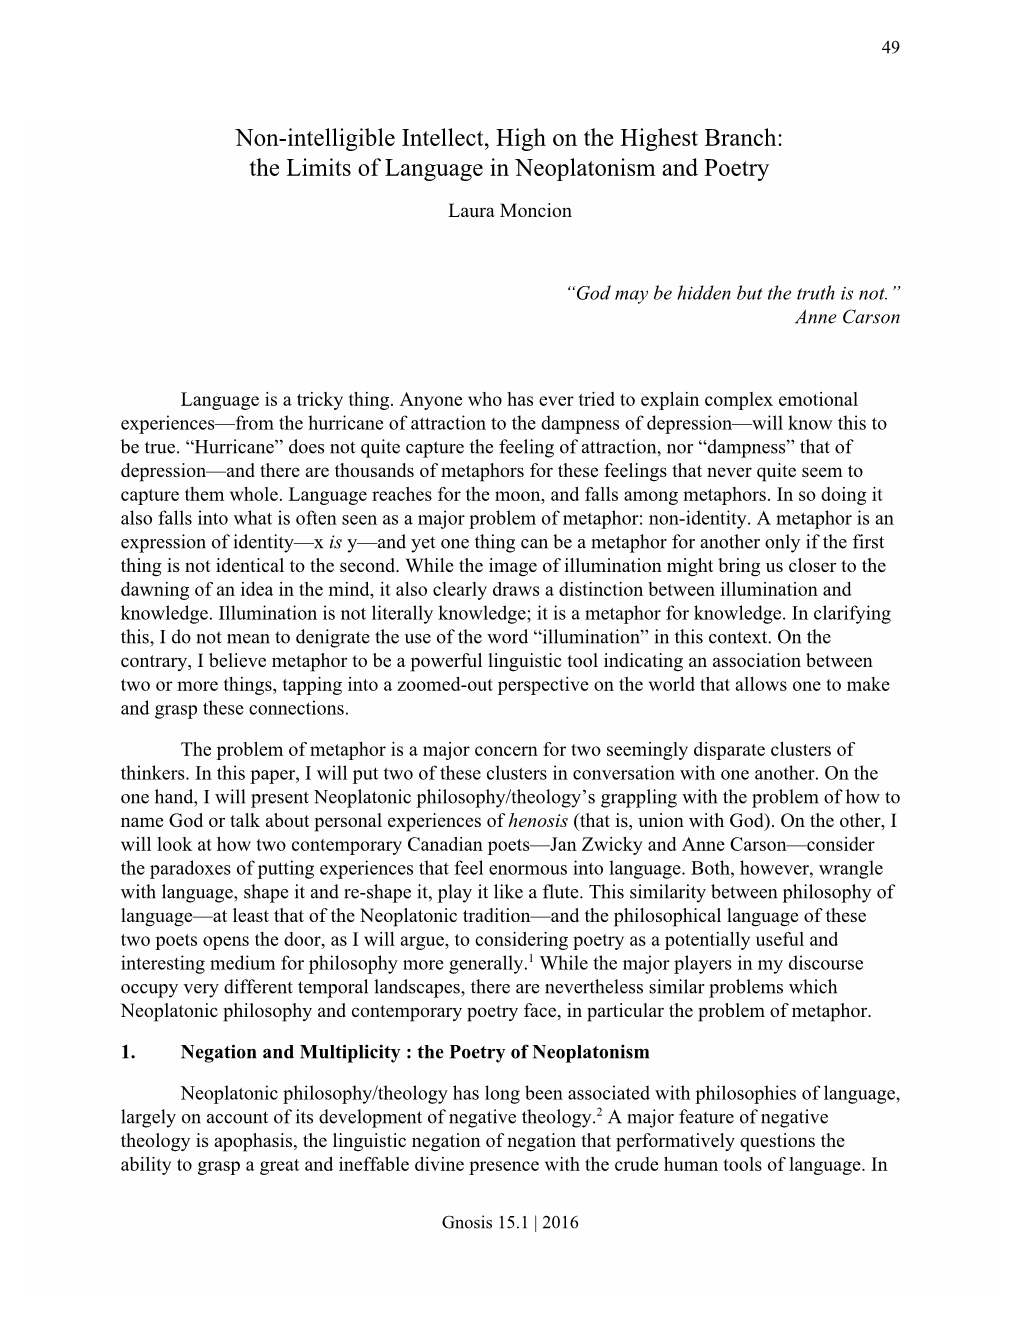 The Limits of Language in Neoplatonism and Poetry